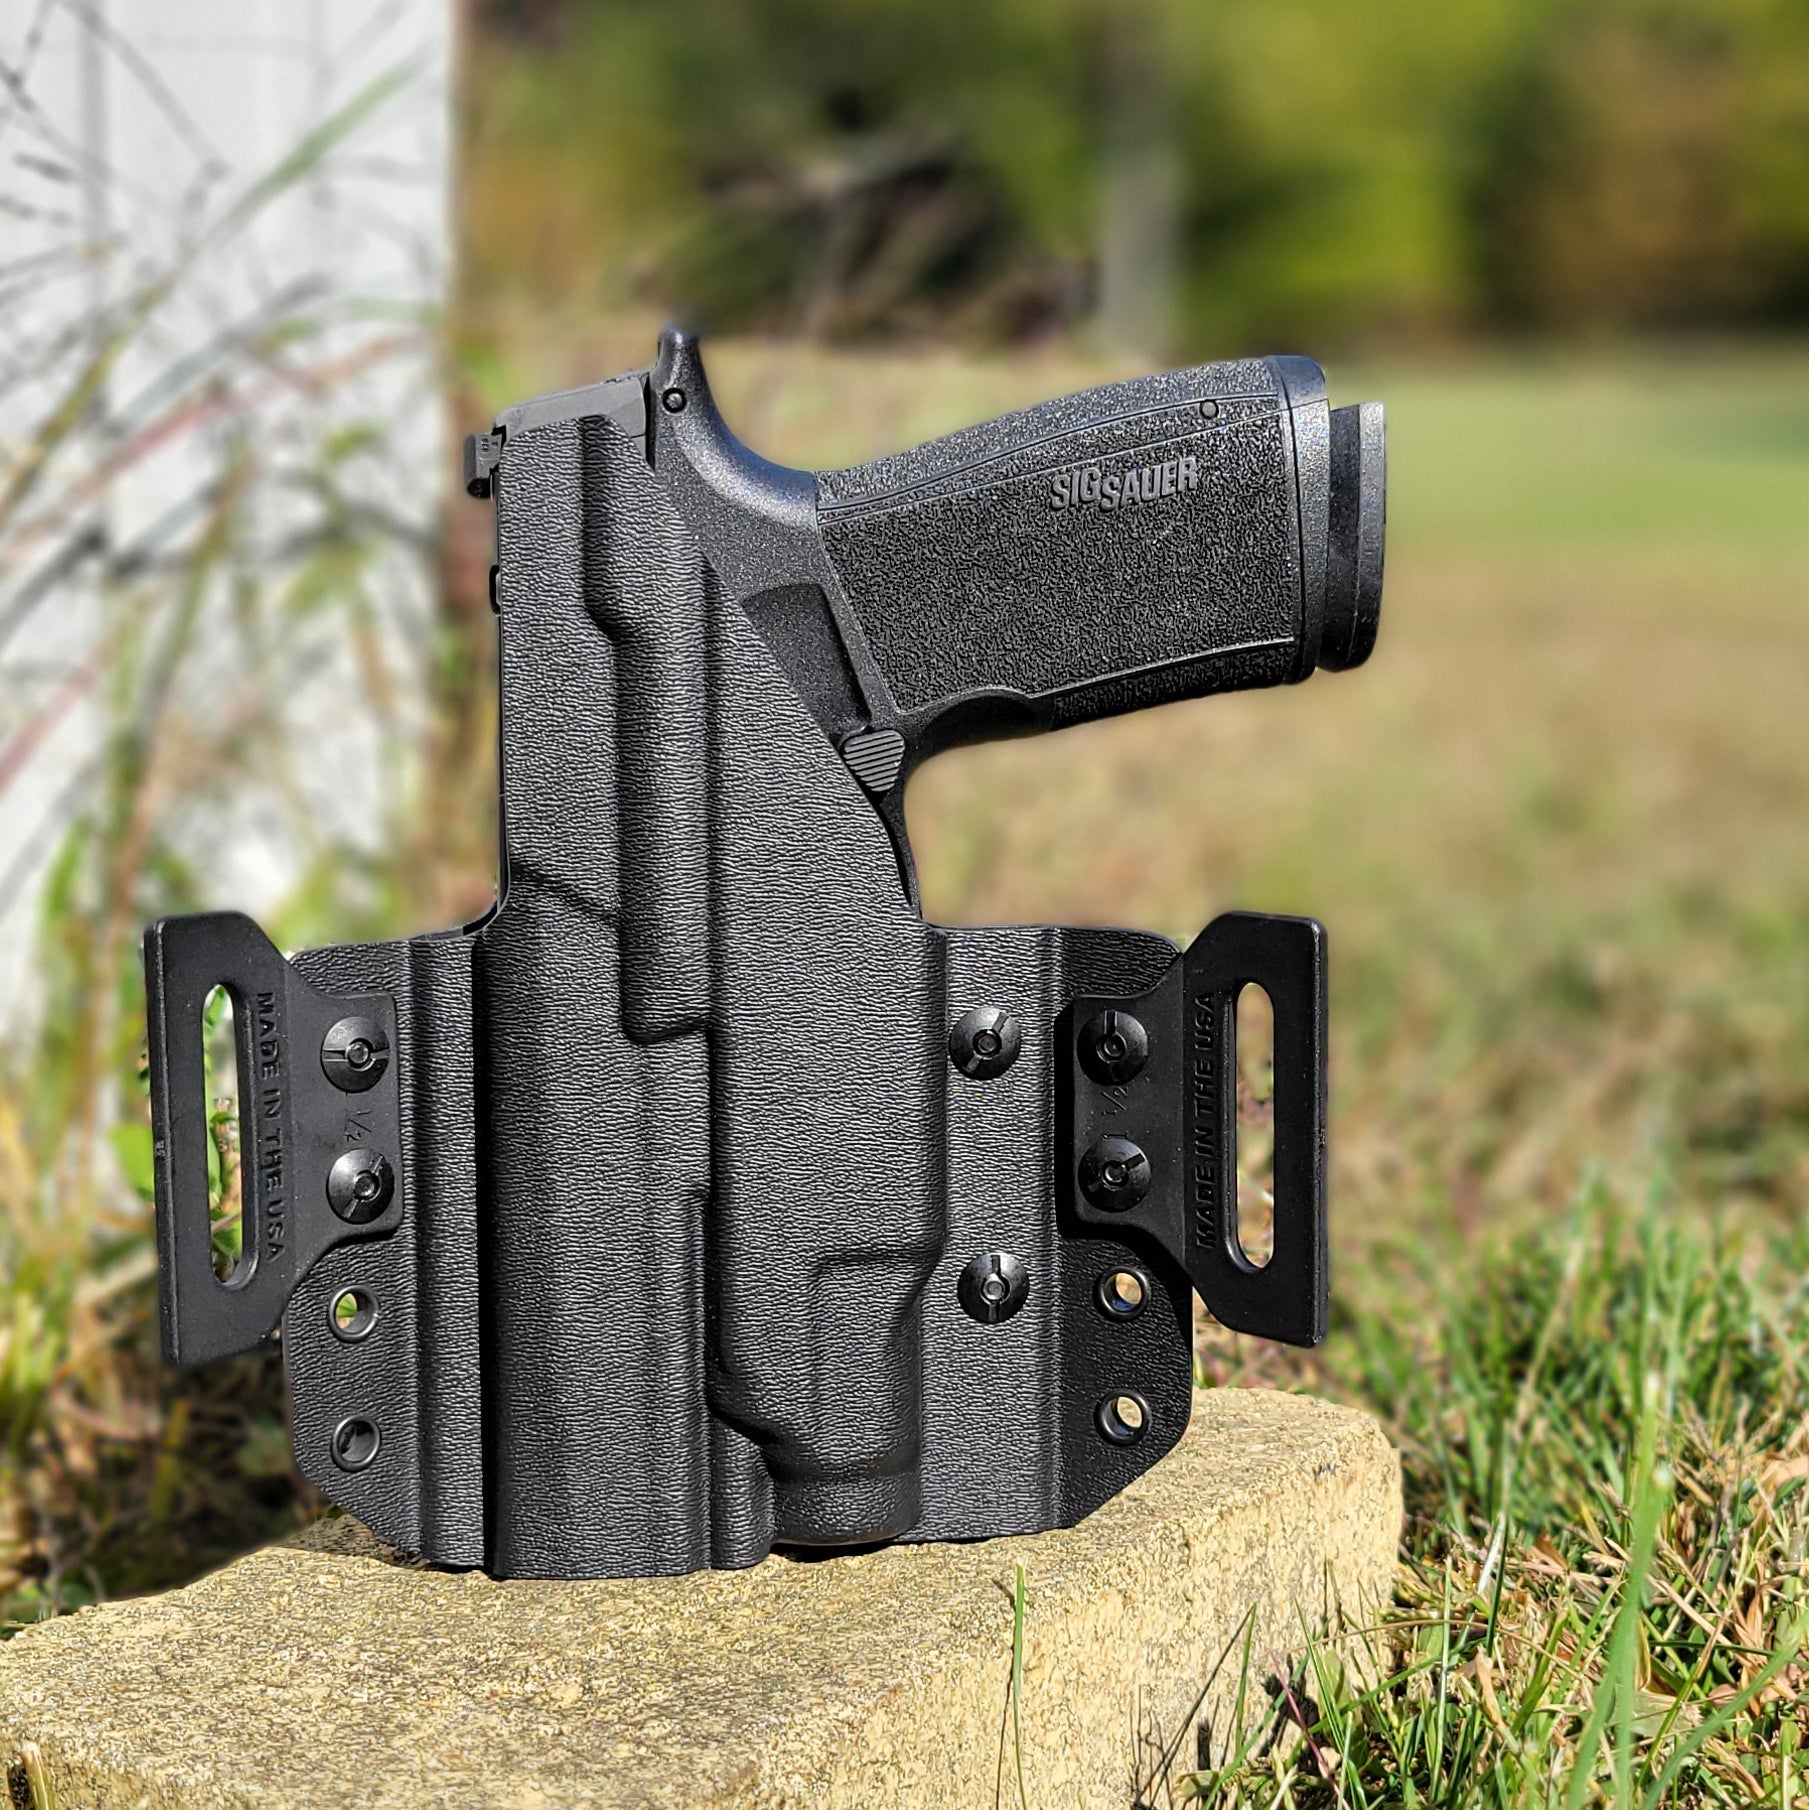 Our Outside Waistband Kydex Pancake holster for the Sig Sauer P365-XMACRO TACOPS with the Streamlight TLR-7 1913 Sub is vacuum formed with a precision machined mold designed from the firearm and light combination.  Open Muzzle, Adjustable retention, Optic, and Red Dot ready. Made in USA. P365 P 365 X MACRO TACOPS